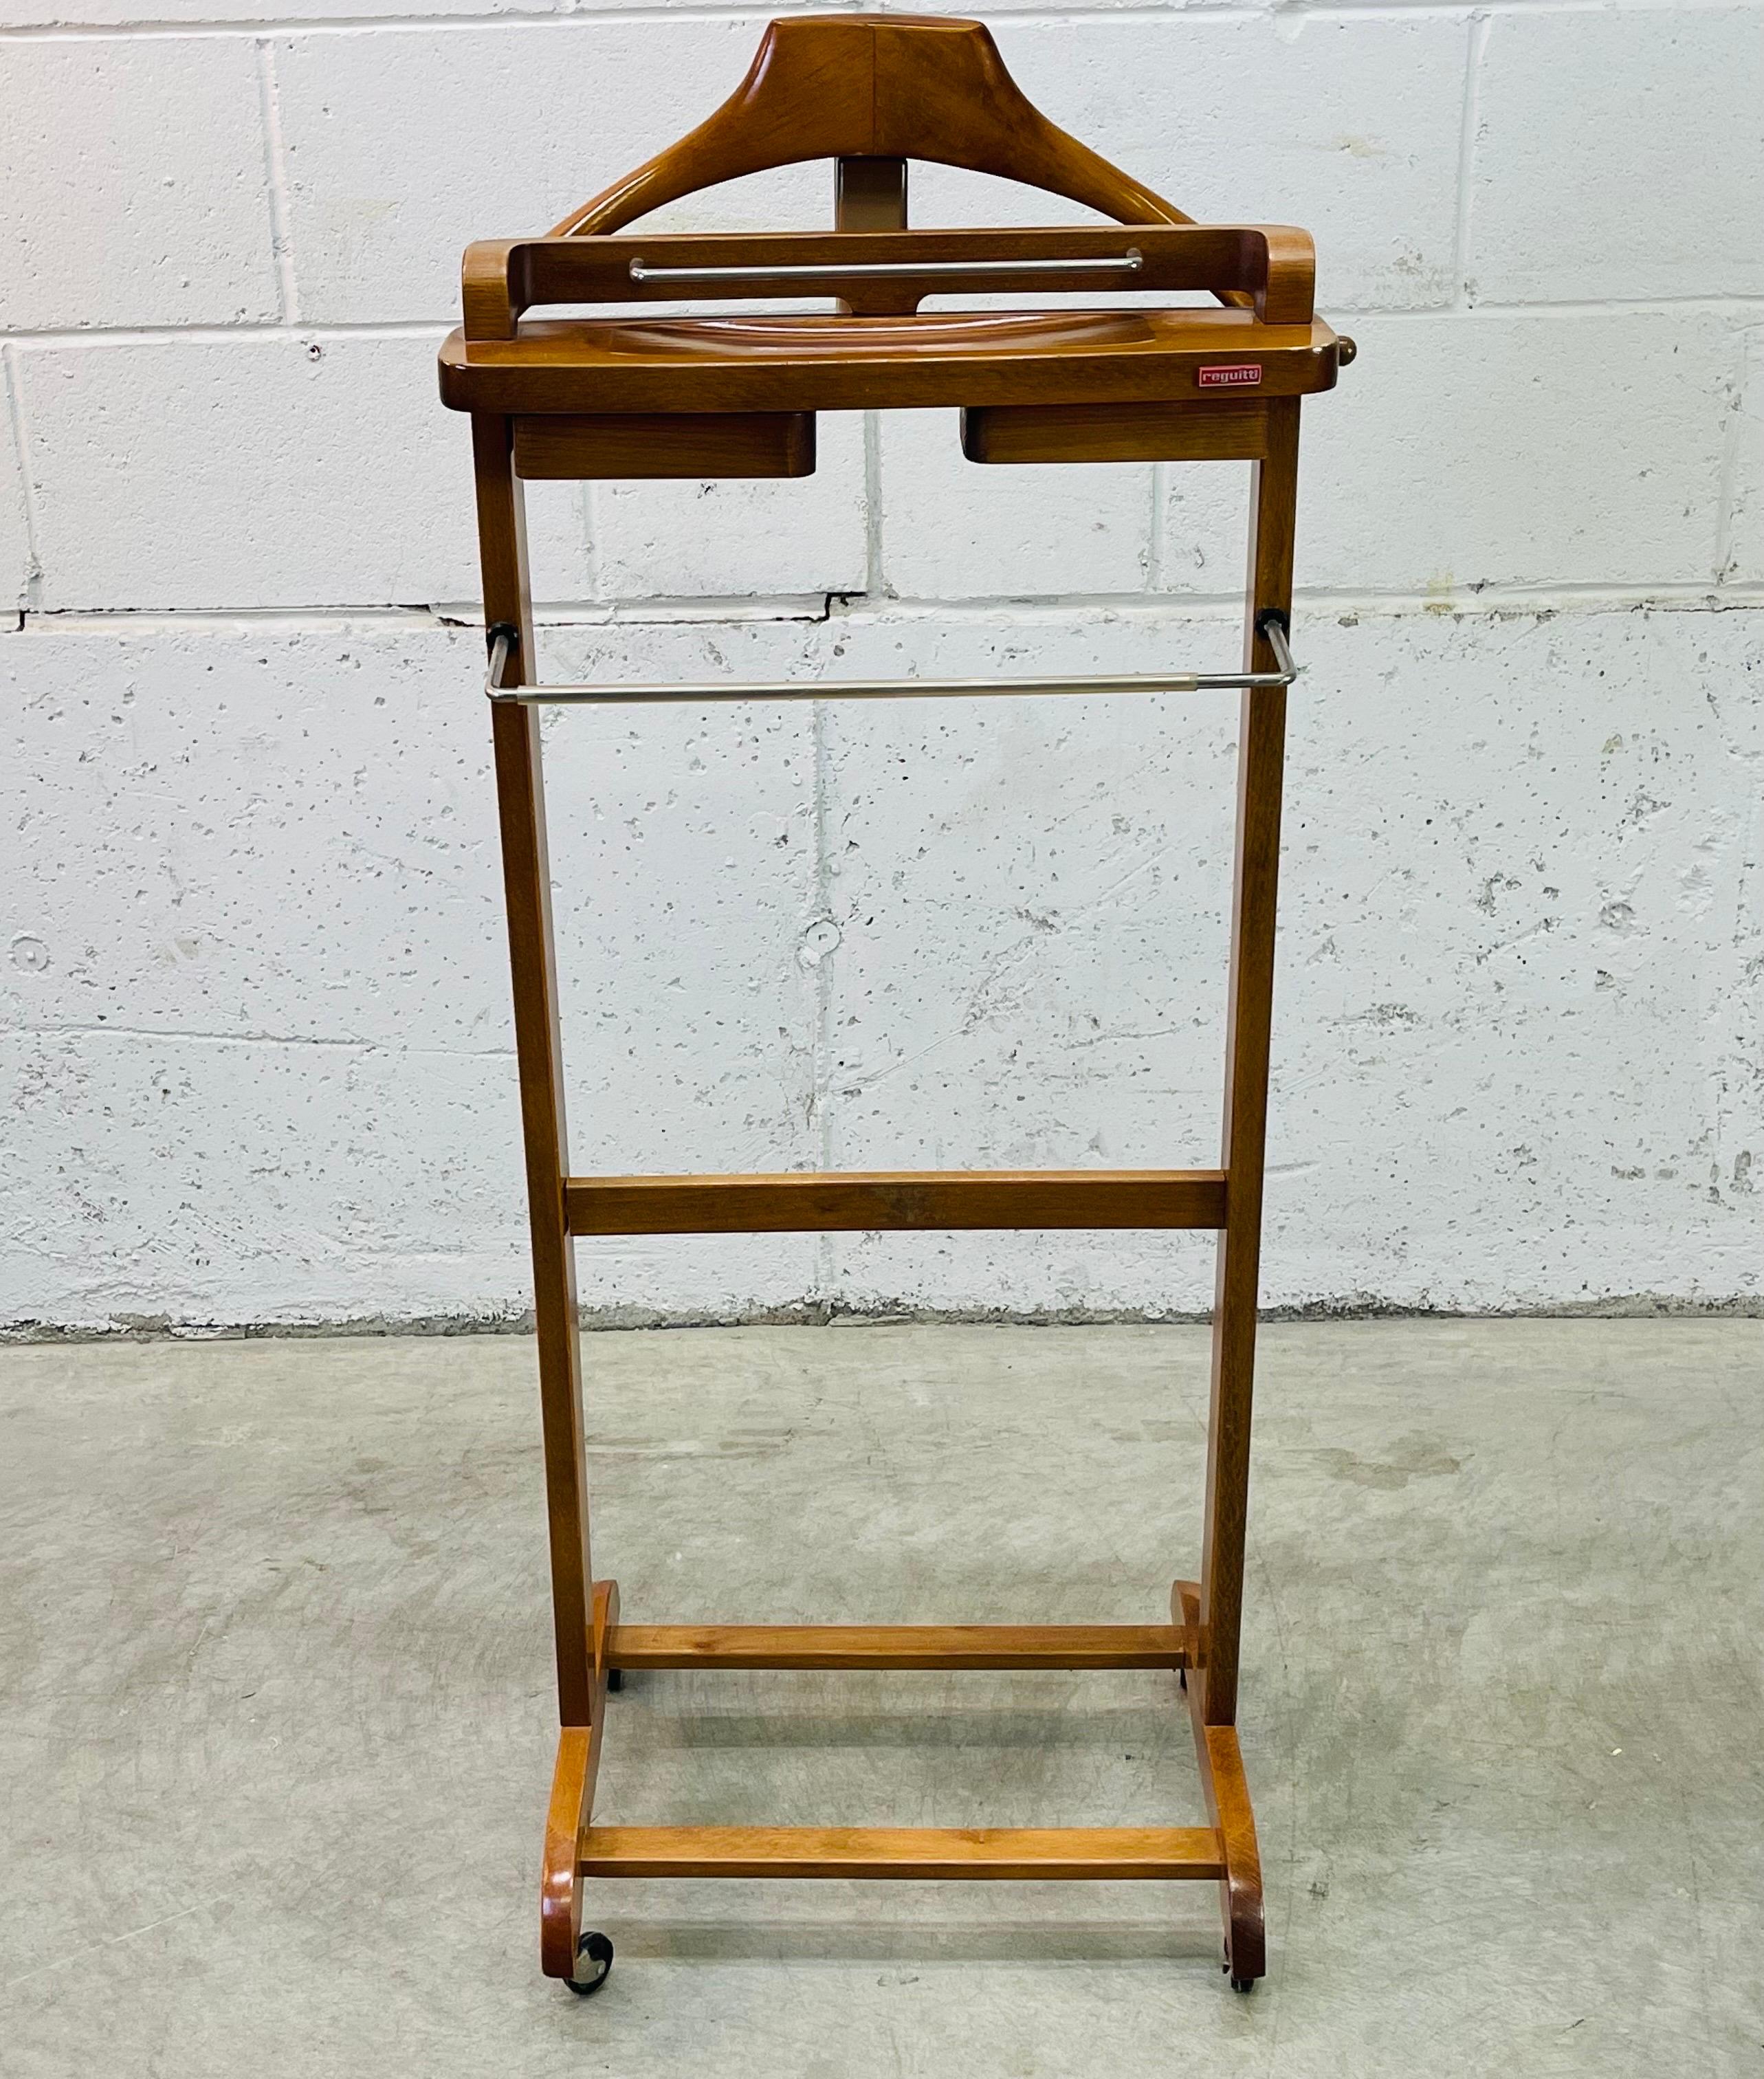 Vintage 1950s Fratelli Reguitti maple wood rolling Italian men’s valet stand. This stand has two moving change compartments and a metal rack for pants storage. It also has an additional shelf for storage. Marked on the front.